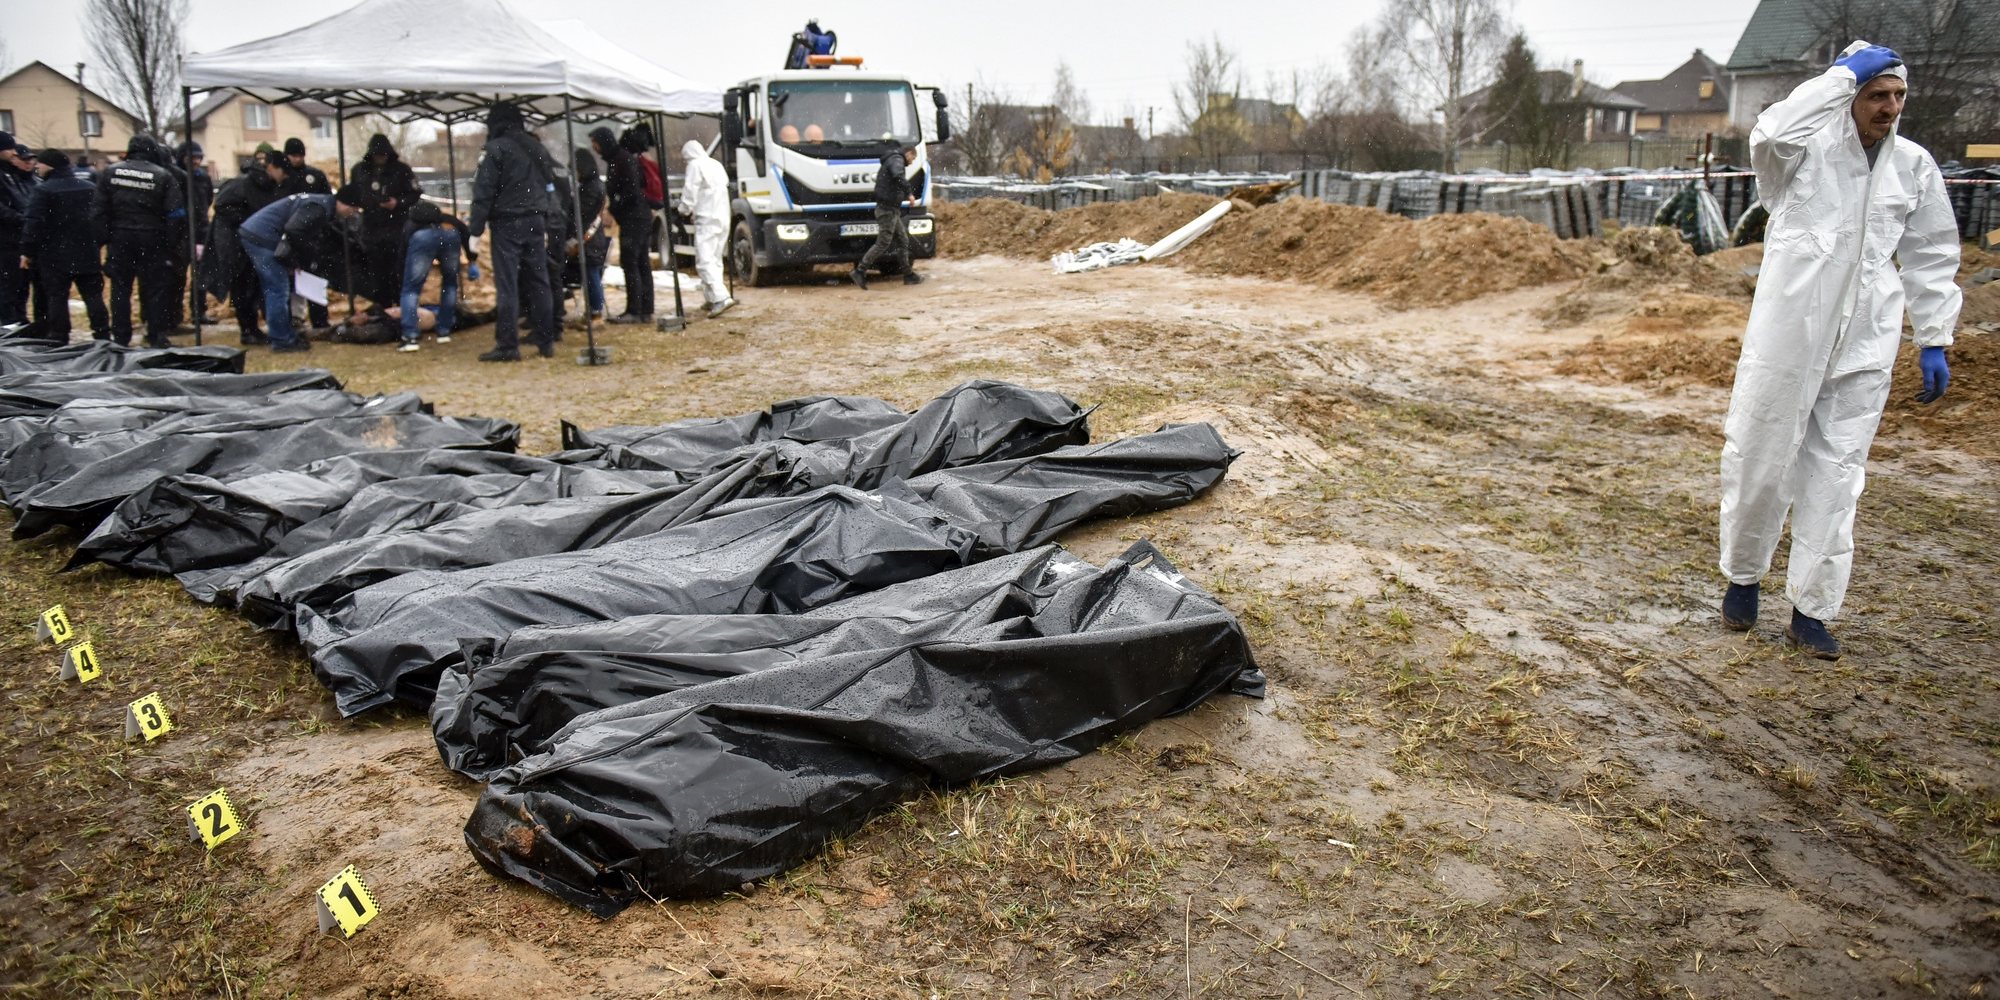 epa09878617 Forensic police officers exhume bodies from a mass grave discovered in Bucha, outskirts of Kyiv (Kiev), Ukraine, 08 April 2022. Ukrainian authorities say that over 400 bodies were discovered following the Russian army’s retreat from towns surrounding Kyiv, prompting international calls for a probe into possible war crimes committed by Russia.  EPA/OLEG PETRASYUK